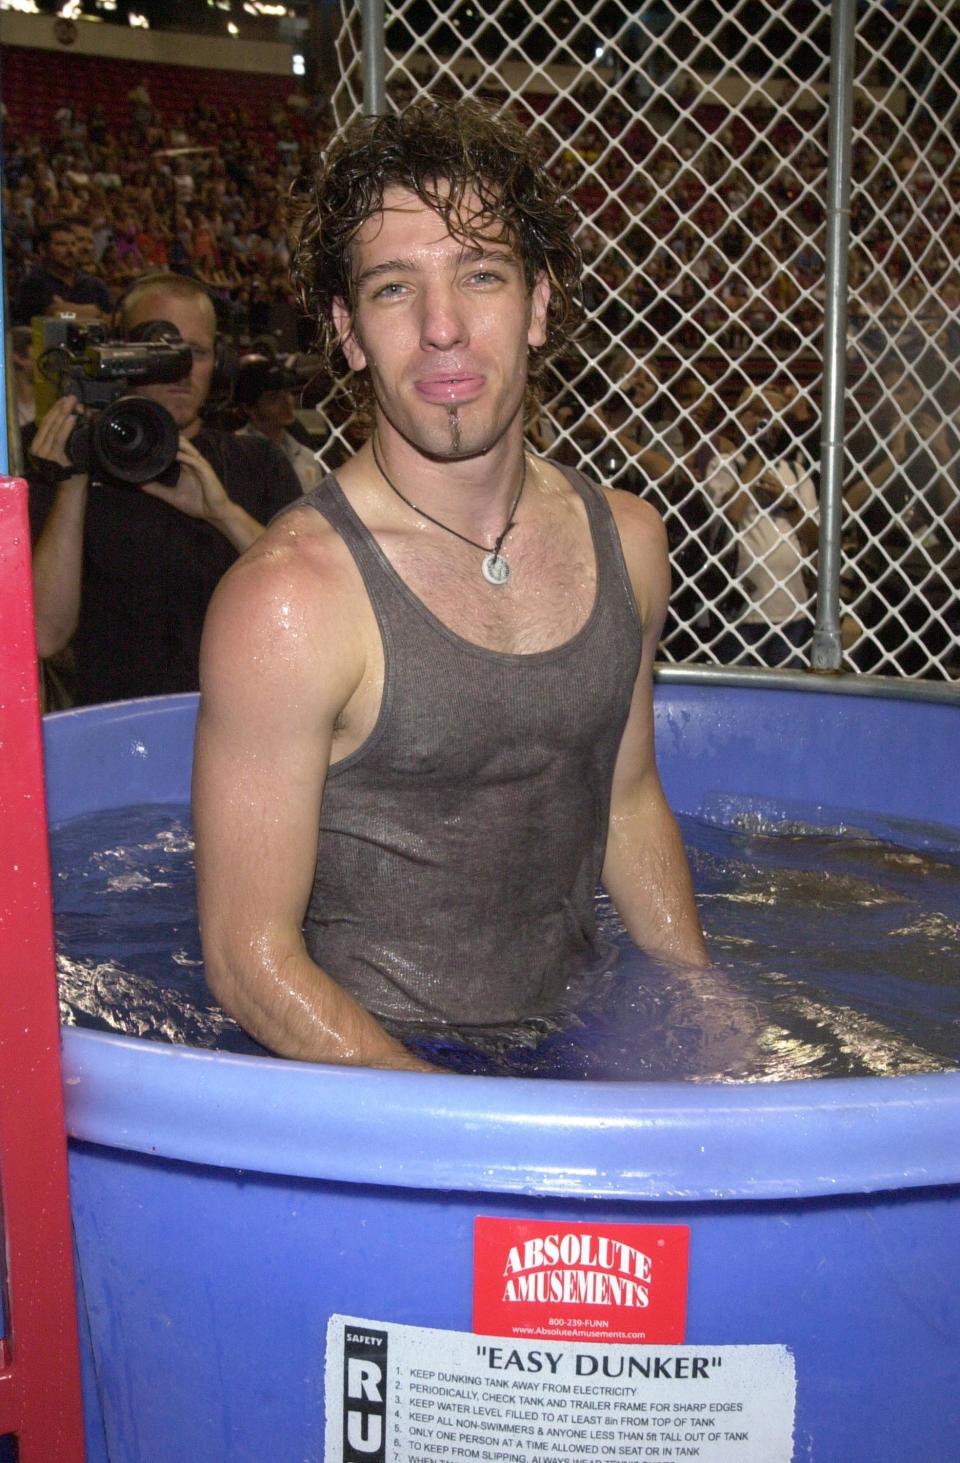 JC after being plunged into a dunk tank